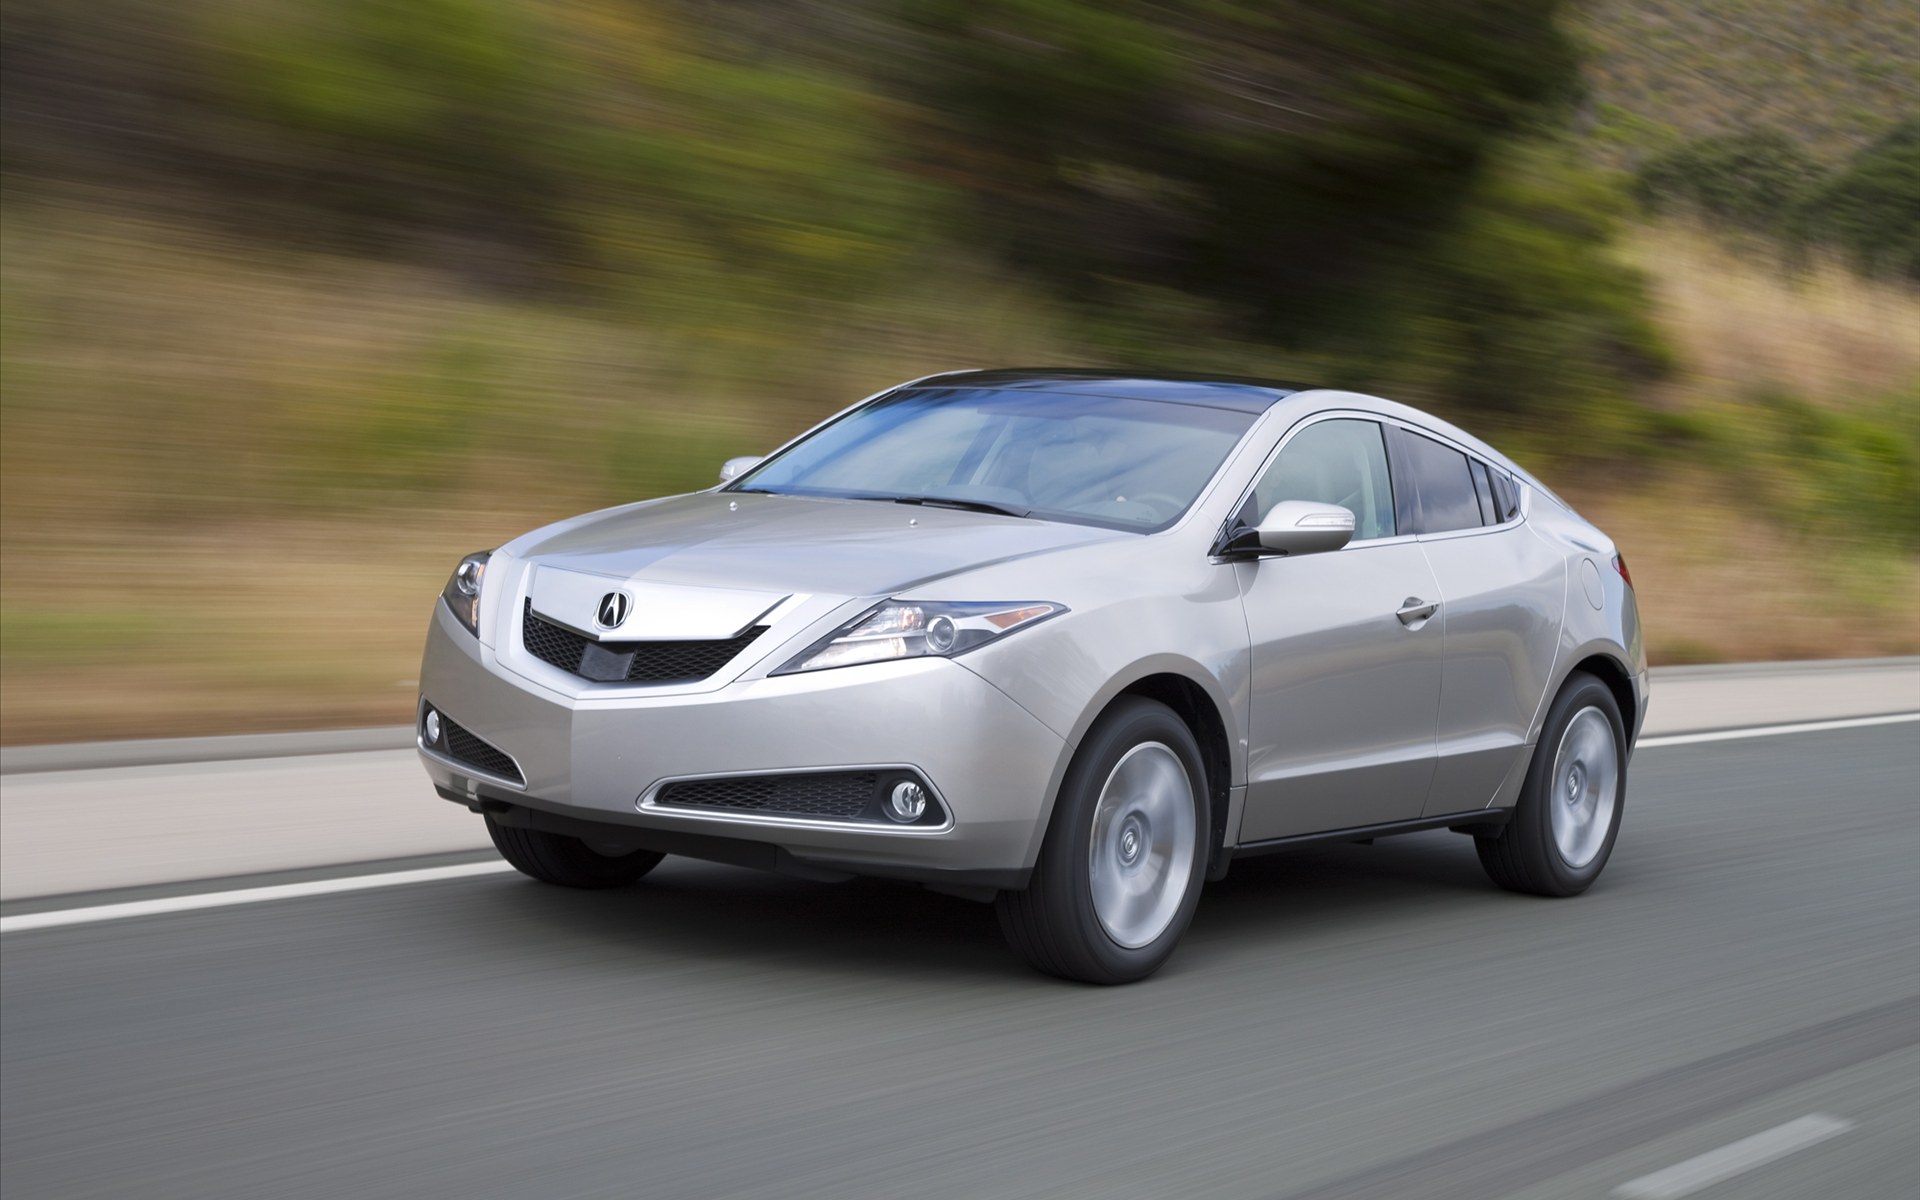 moving car wallpapers,land vehicle,vehicle,car,acura zdx,acura